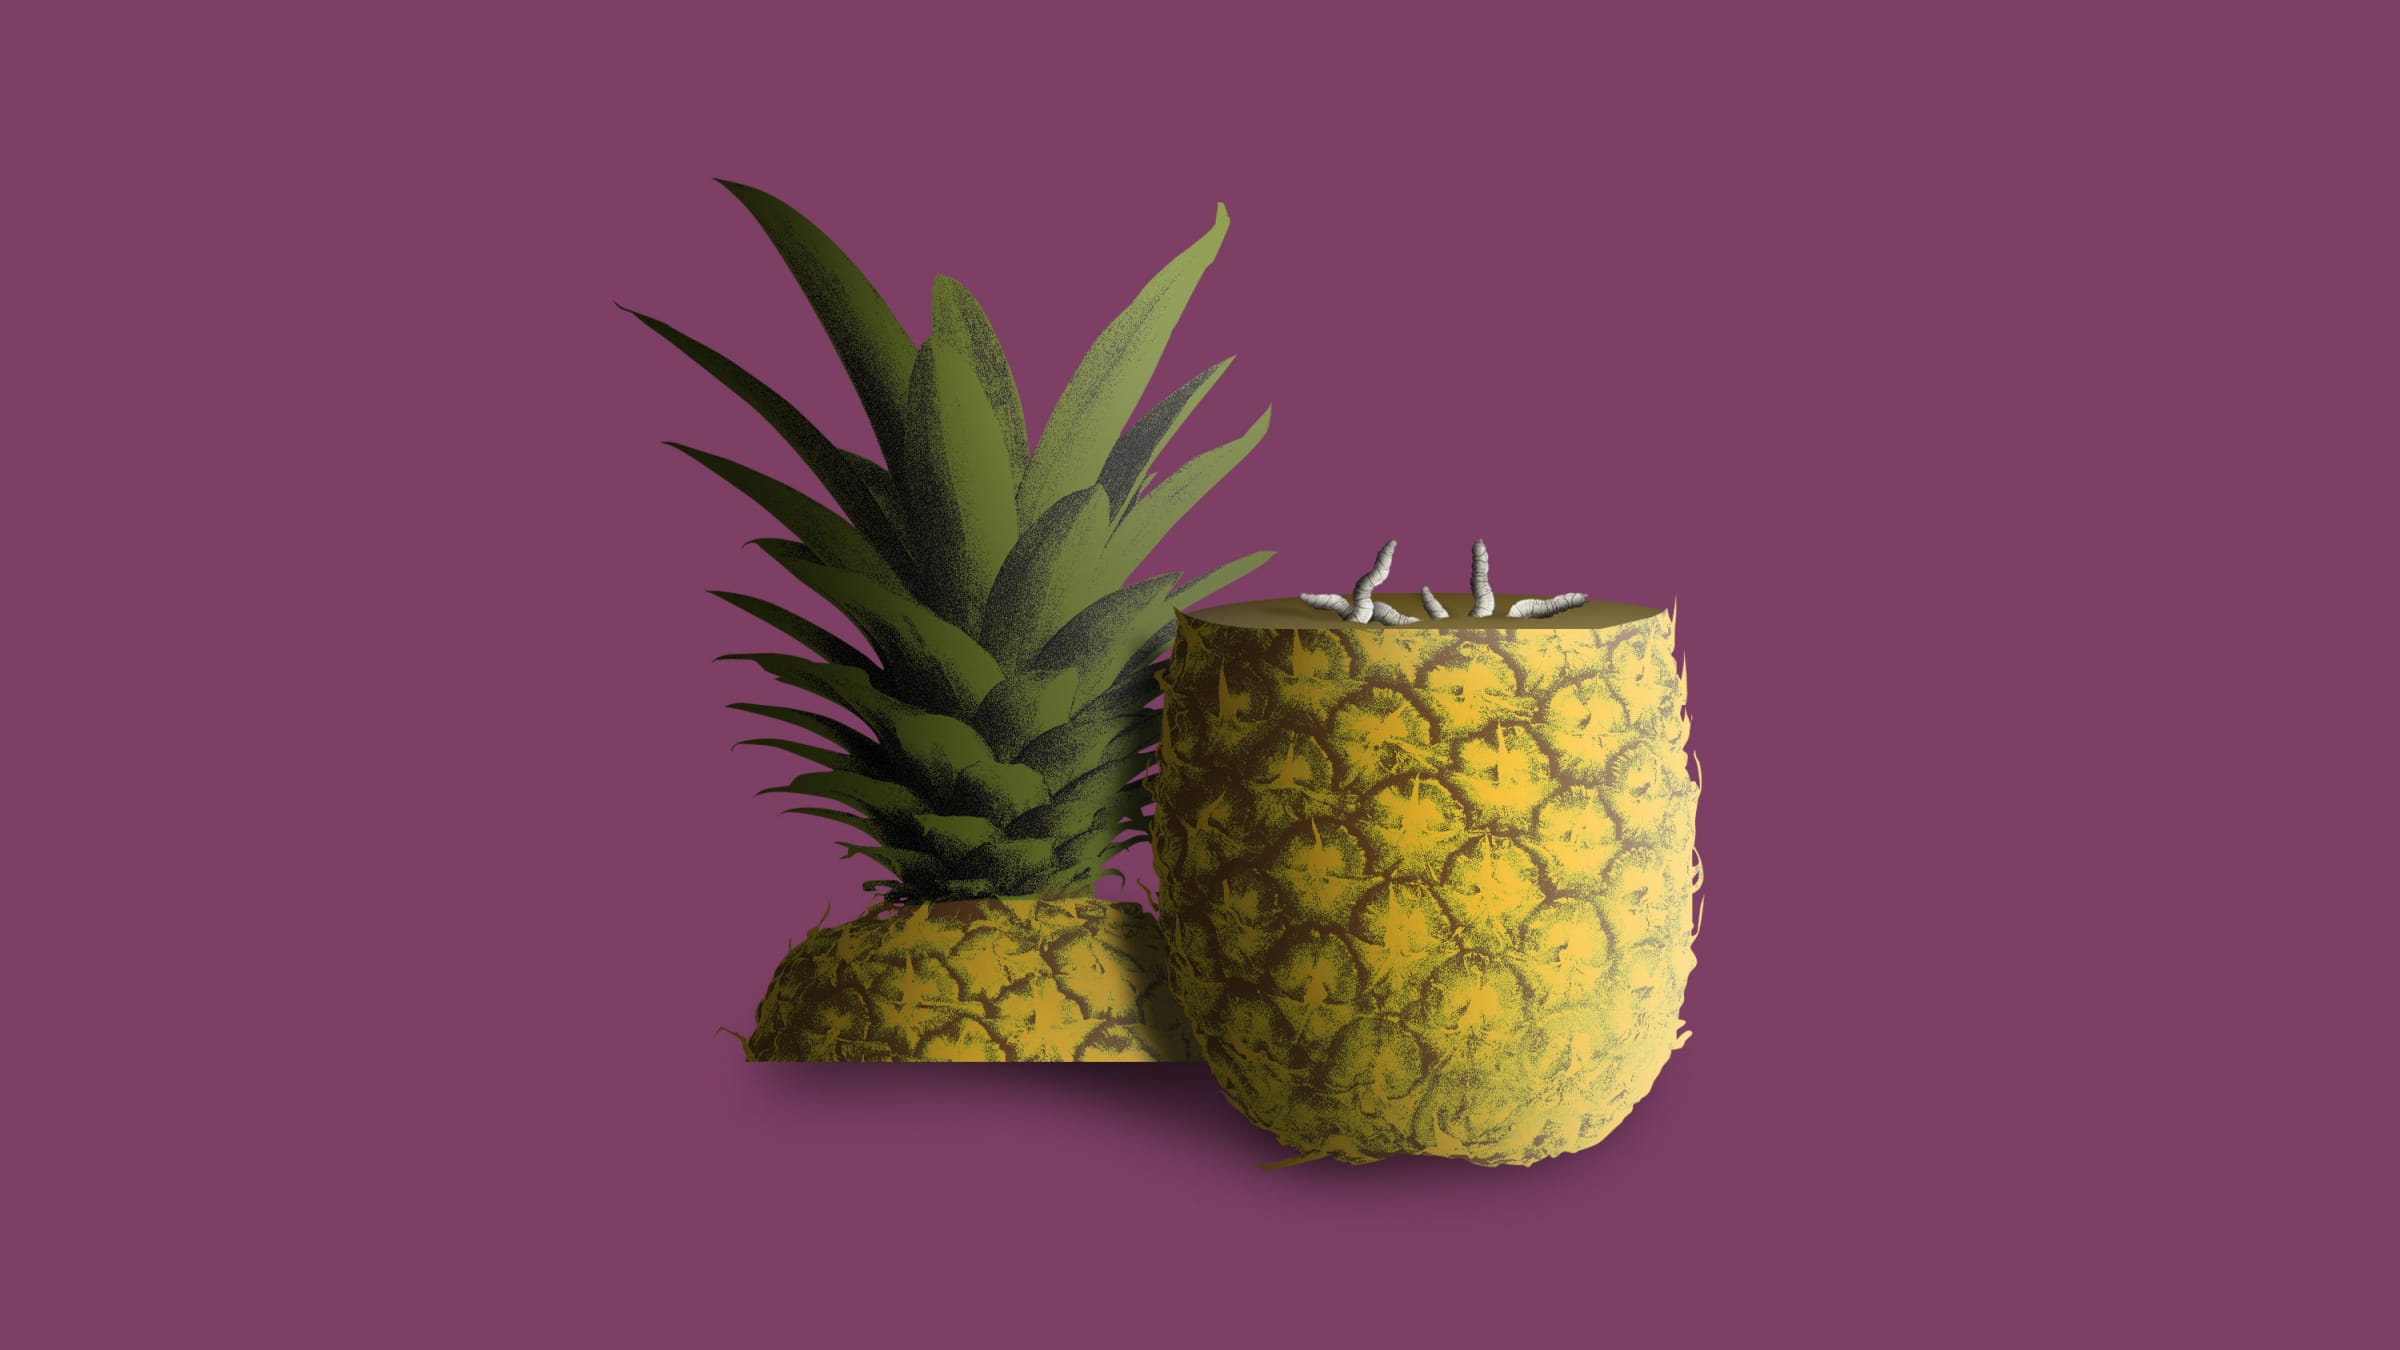 pineapple used as symbol wife swapping hd photo